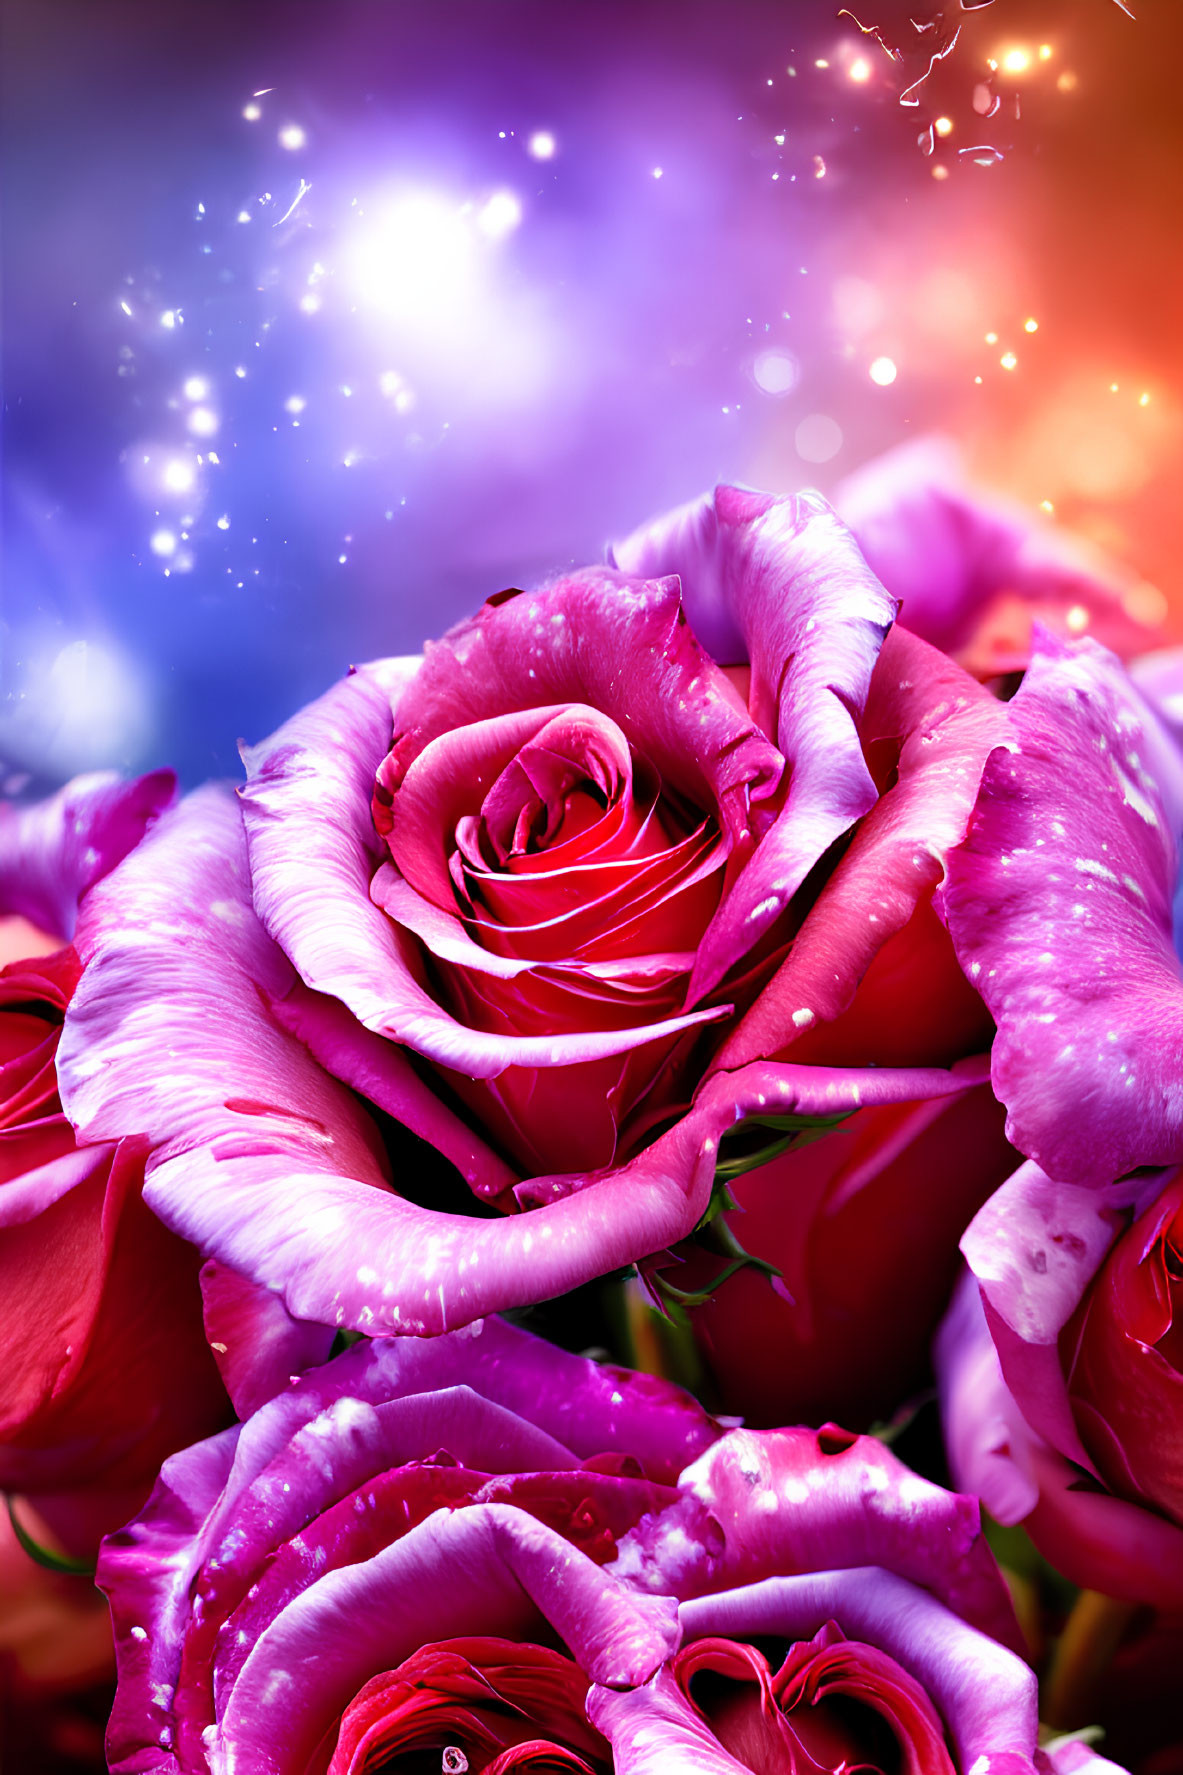 Colorful Purple Rose Bouquet on Cosmic Background with Stars